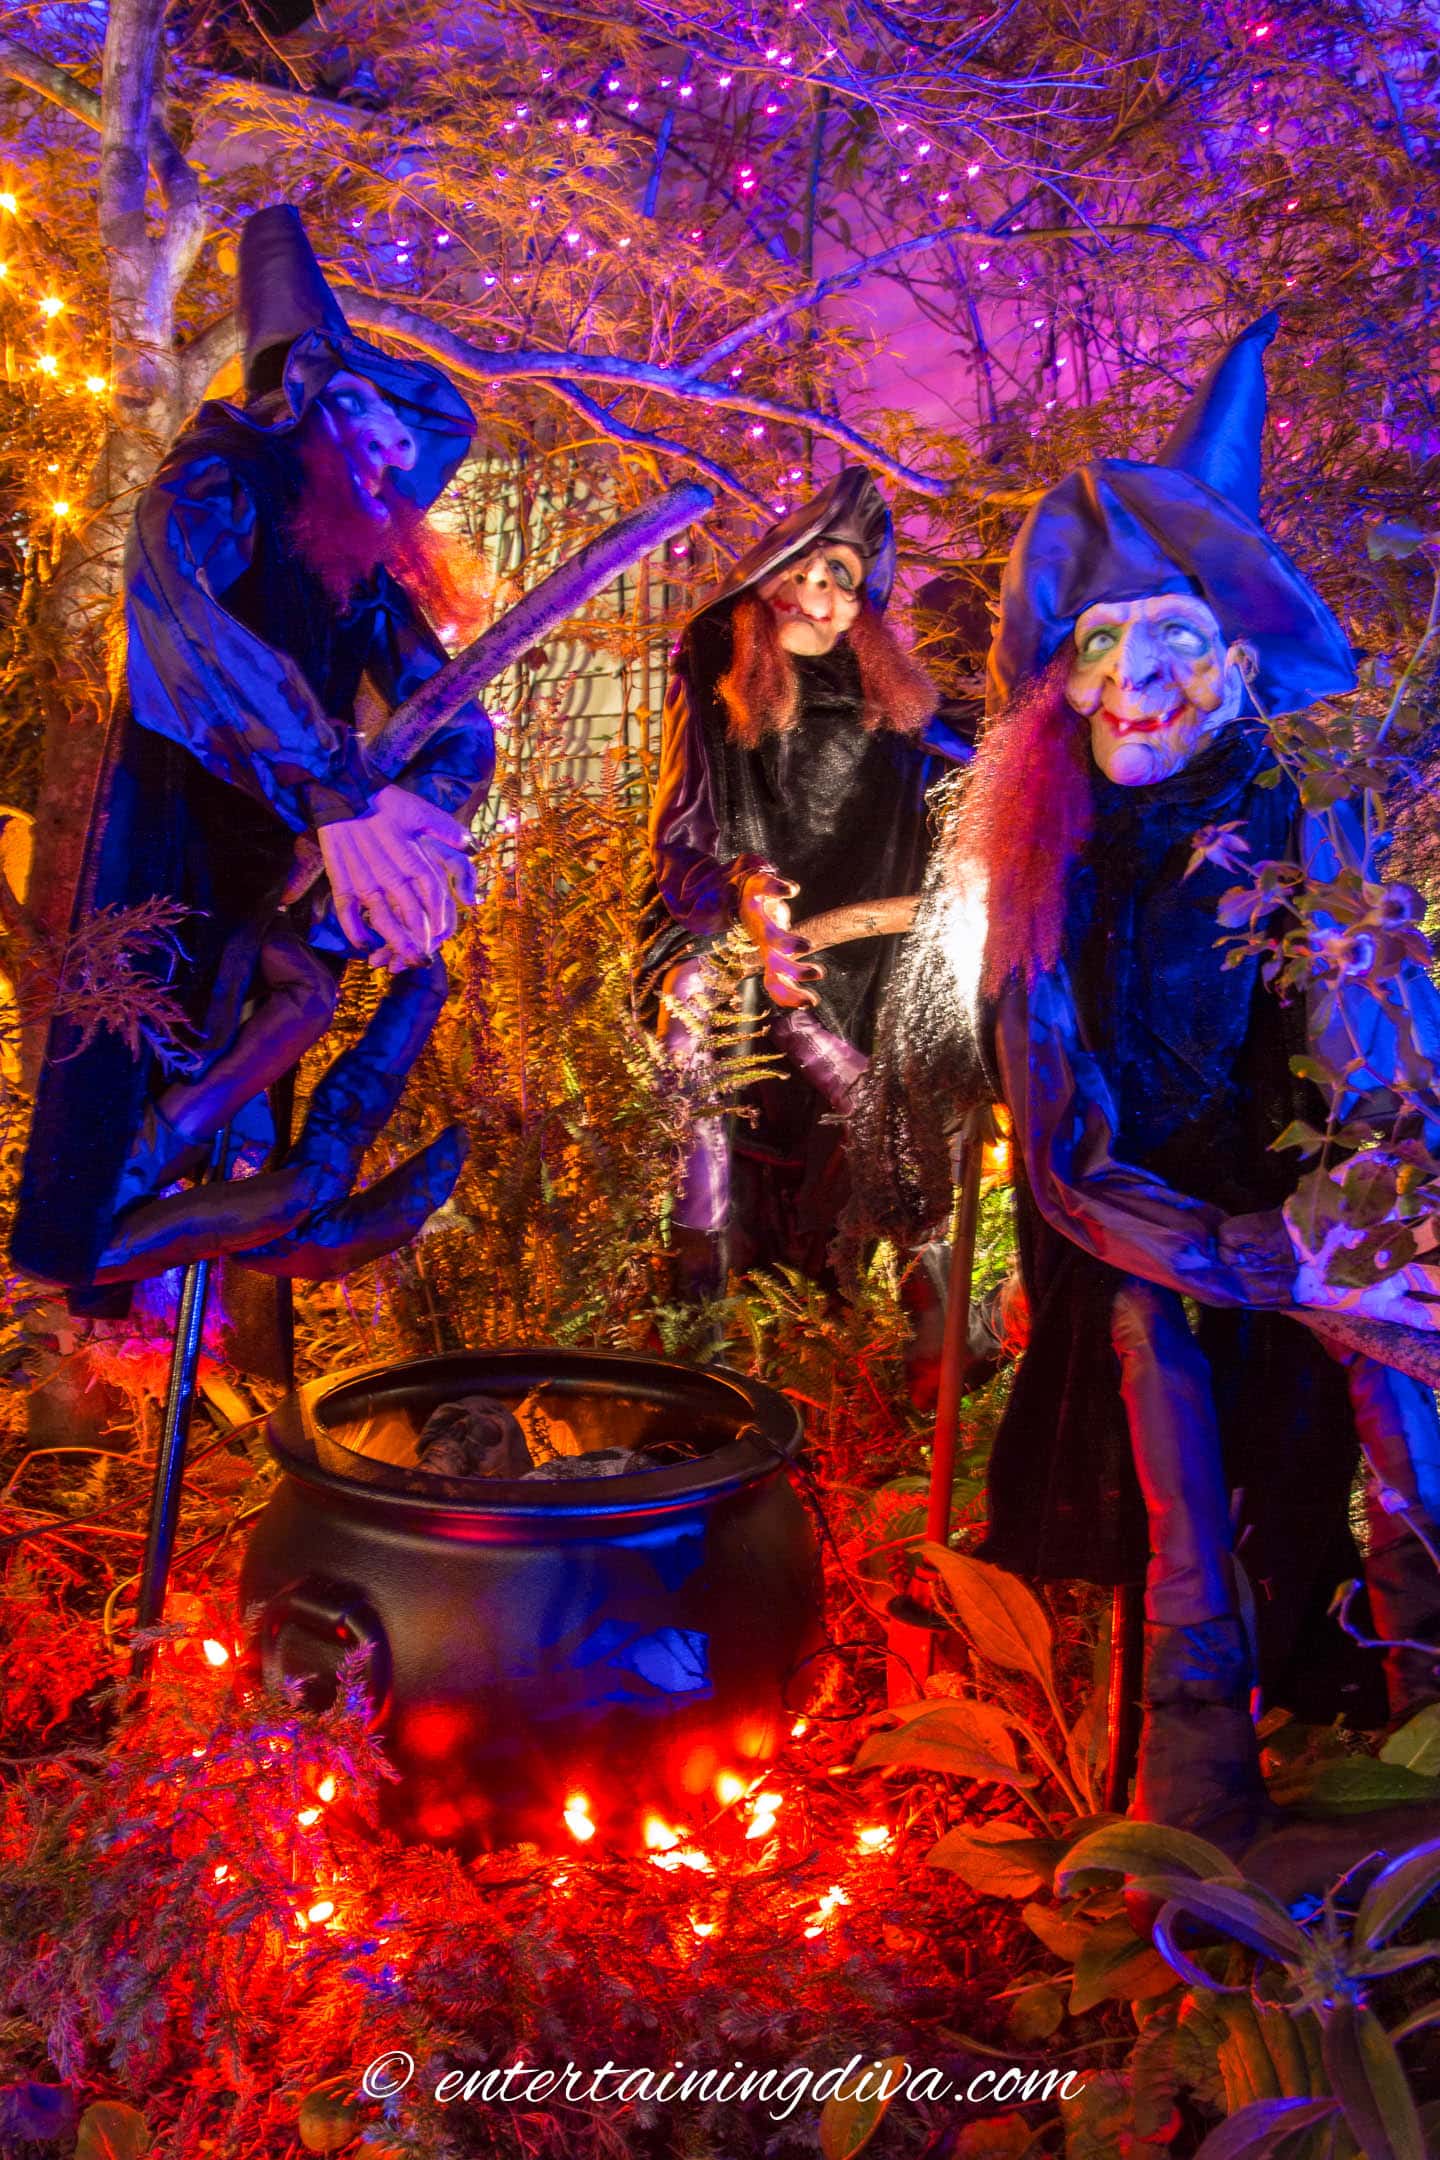 A group of witches brewing potions in front of a cauldron, illuminated by Halloween outdoor lighting.